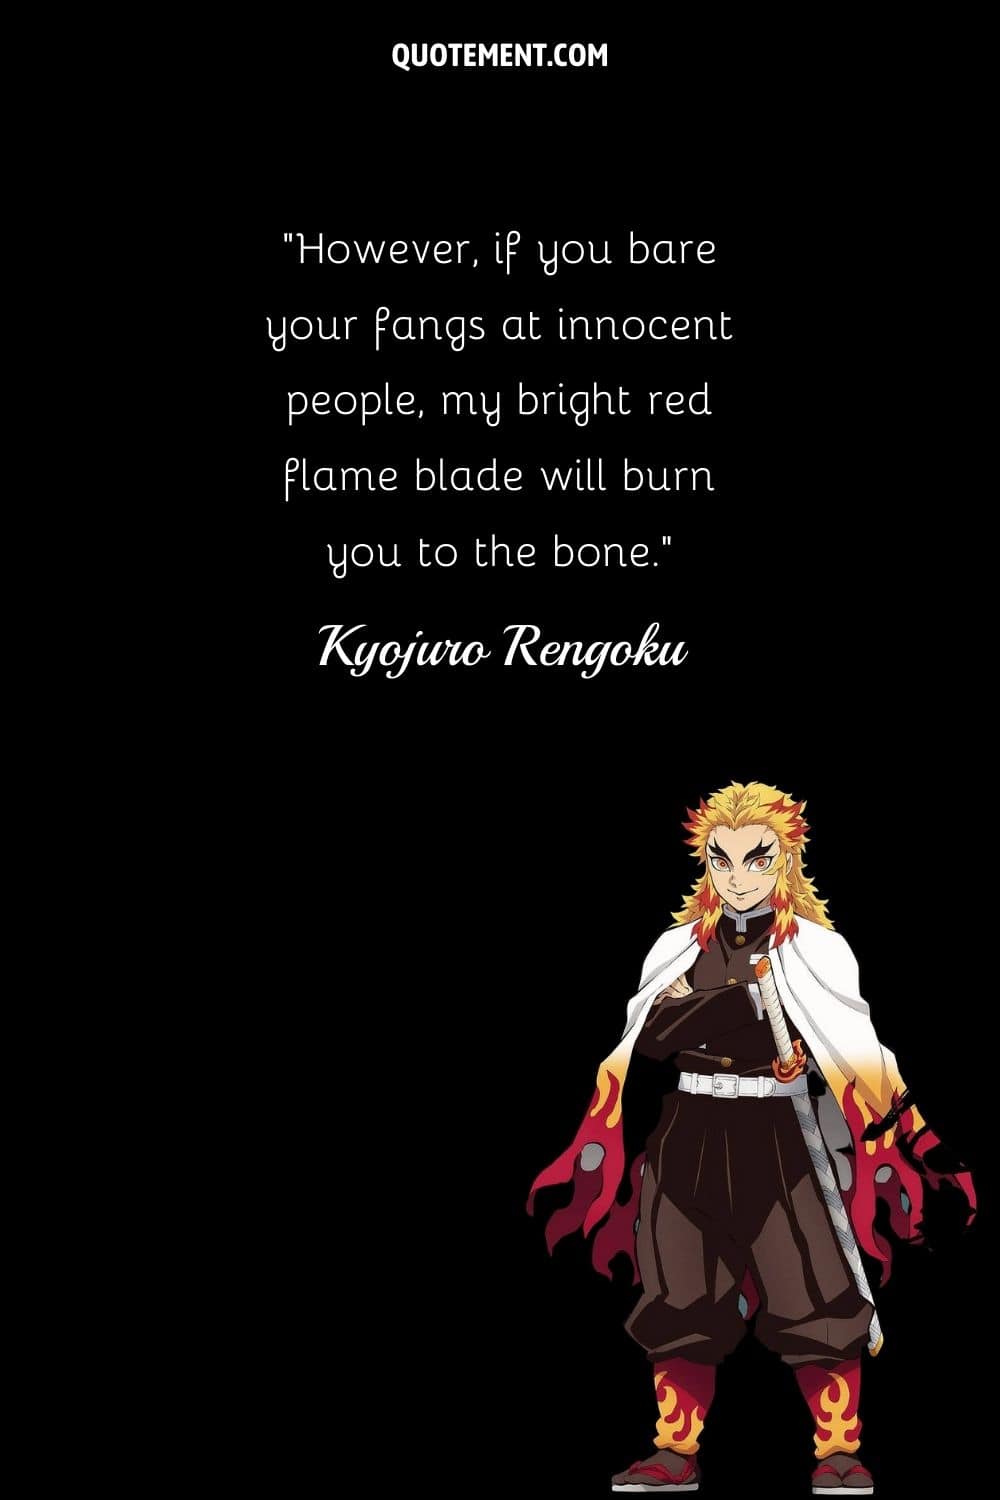 However, if you bare your fangs at innocent people, my bright red flame blade will burn you to the bone